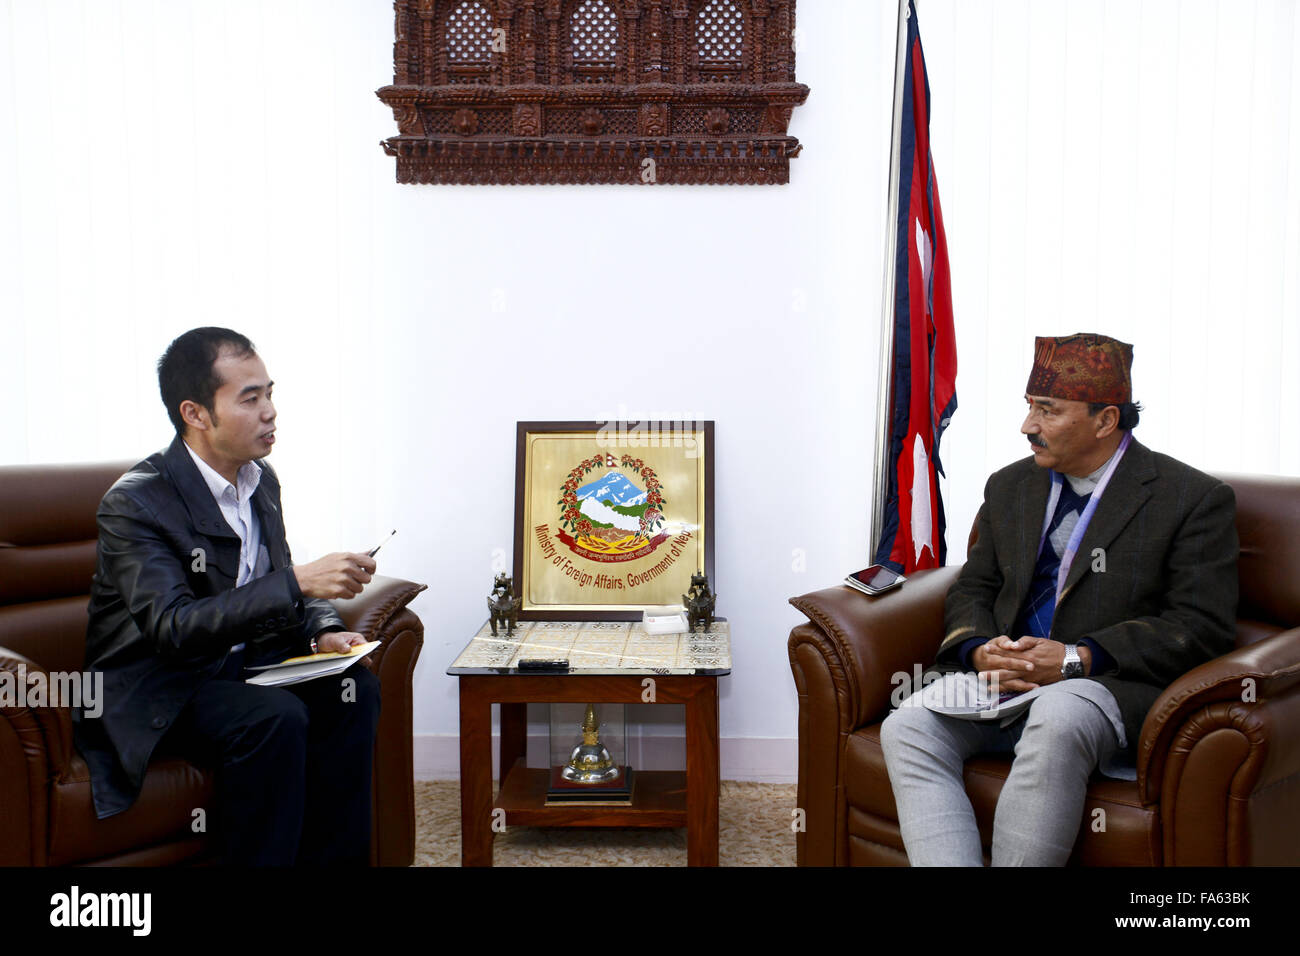 Kathmandu, Nepal. 22nd Dec, 2015. Nepal's Deputy Prime Minister and Minister for Foreign Affairs Kamal Thapa (R) receives an interview with Xinhua before his five-day official visit to China, in Kathmandu, Nepal, Dec. 22, 2015. Kamal Thapa will leave for China on Wednesday. During the visit, Nepal is expected to seal a trade and transit agreement with China as well as finalize the details for importing petroleum products from the northern neighbor on a commercial basis. Credit:  Pratap Thapa/Xinhua/Alamy Live News Stock Photo